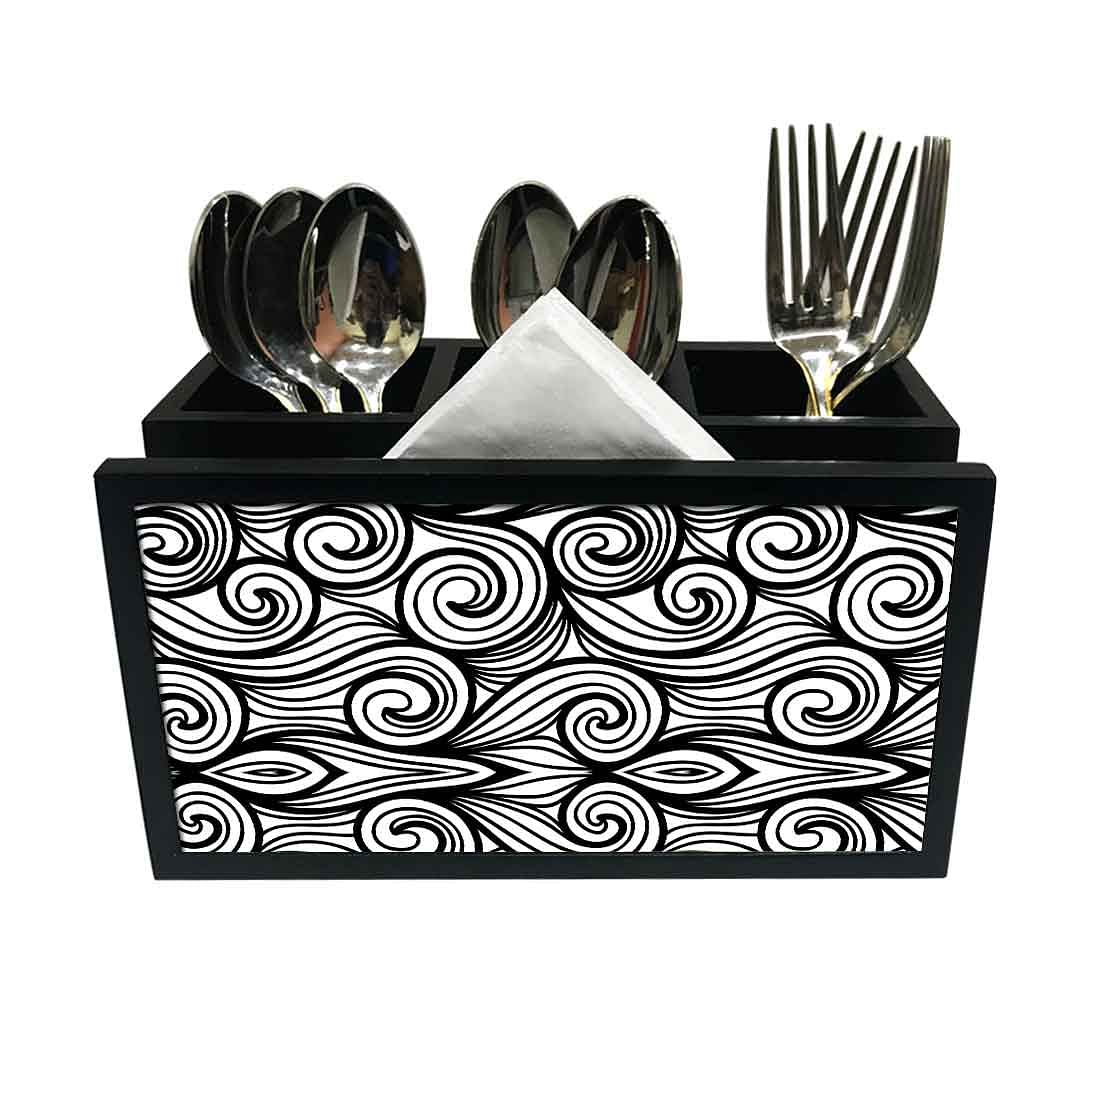 Cutlery Tissue Holder Napkin Stand -  Black and White Pattern Nutcase